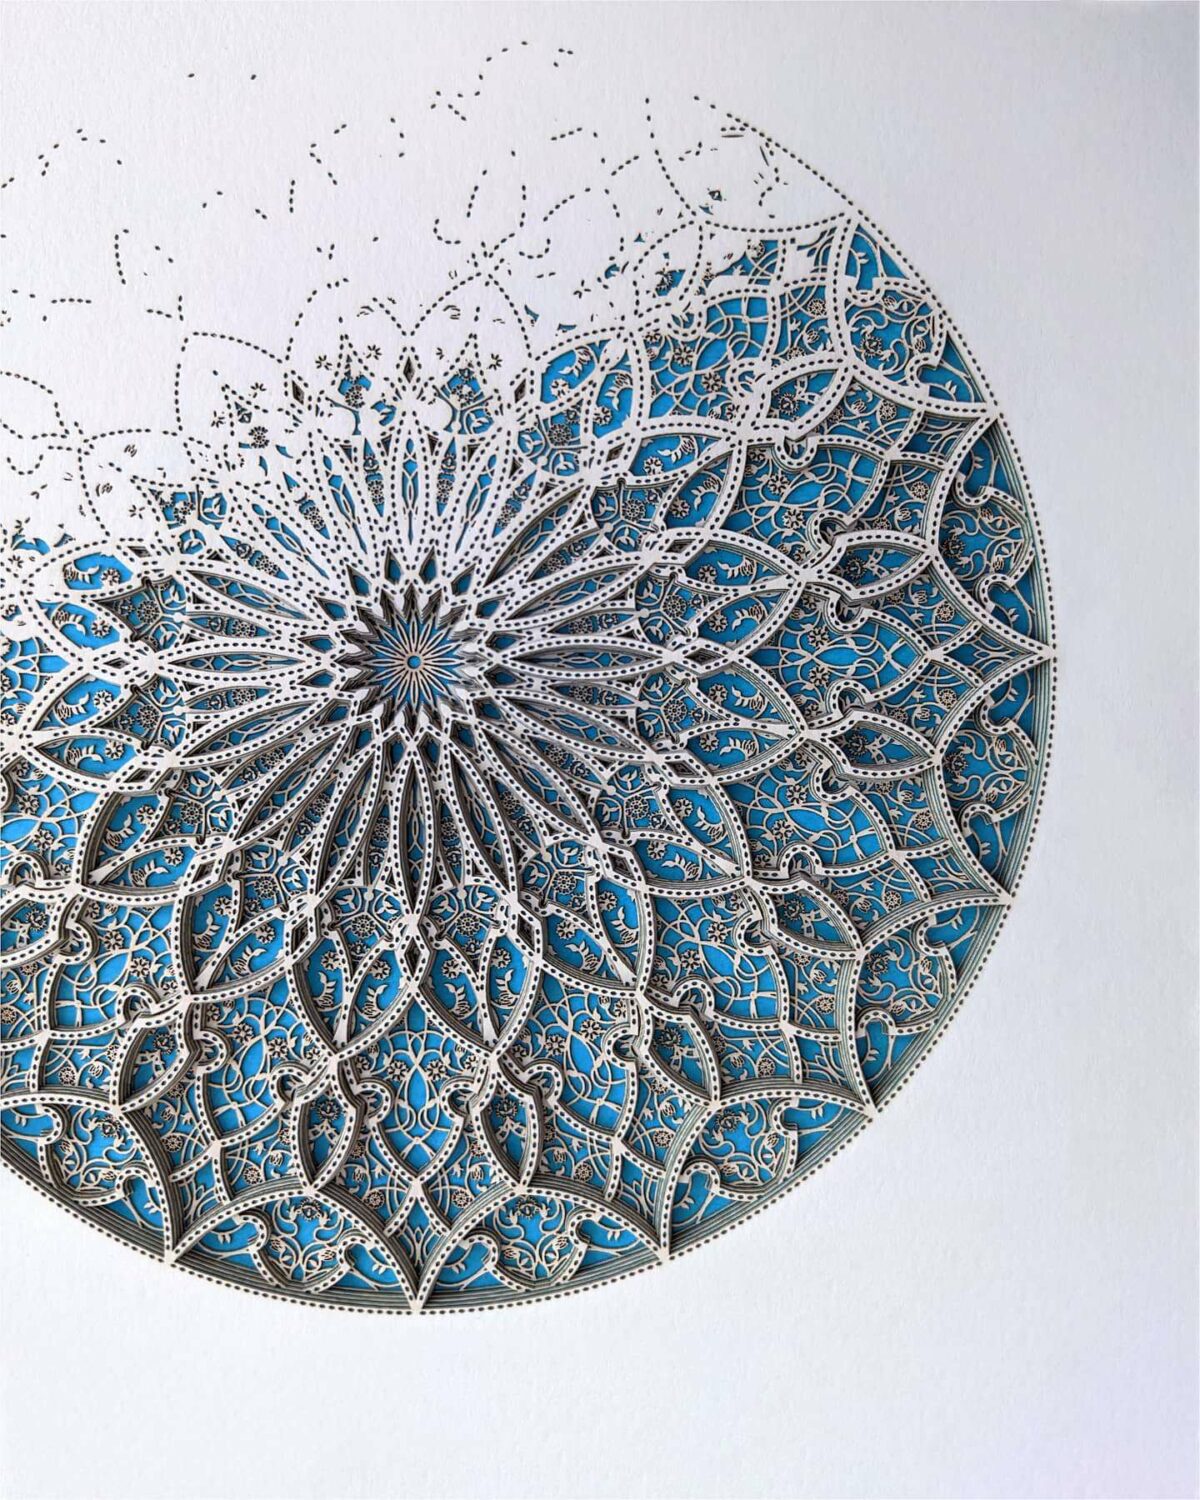 Intricate And Colorful Arabesque Made Of Laser Cut Paper Julia Ibbini 5